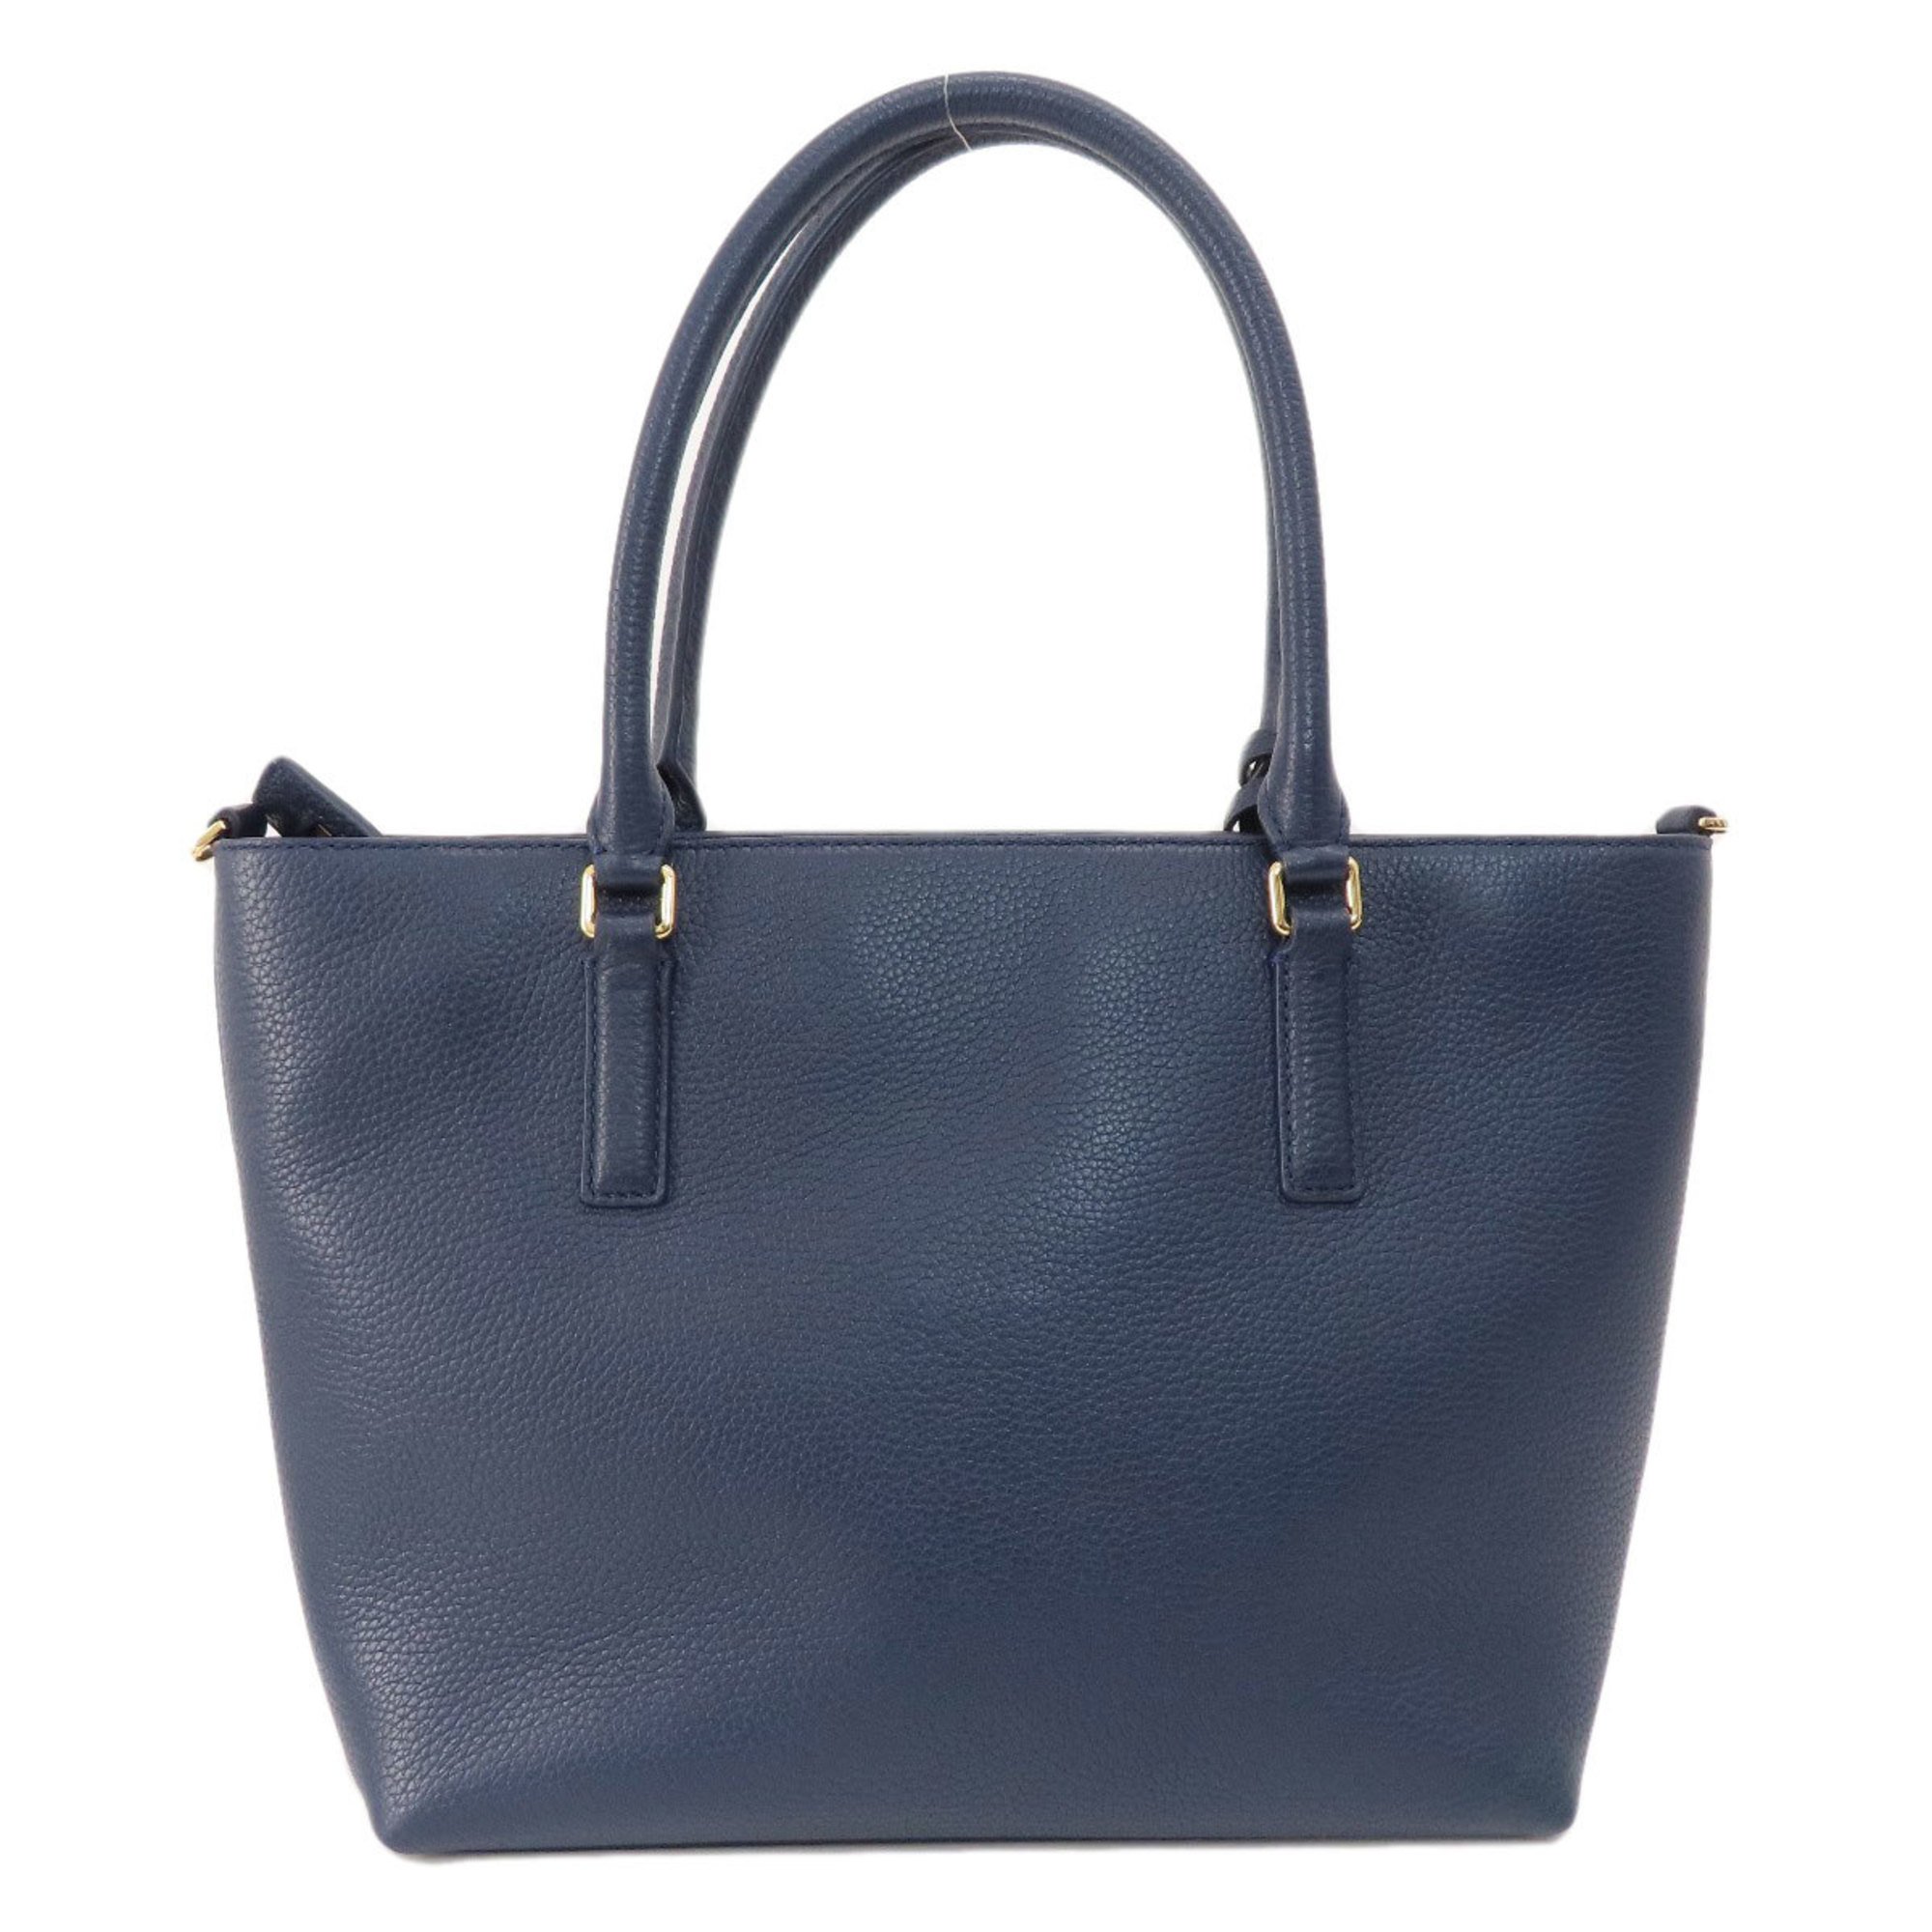 Tory Burch Leather Tote Bag for Women